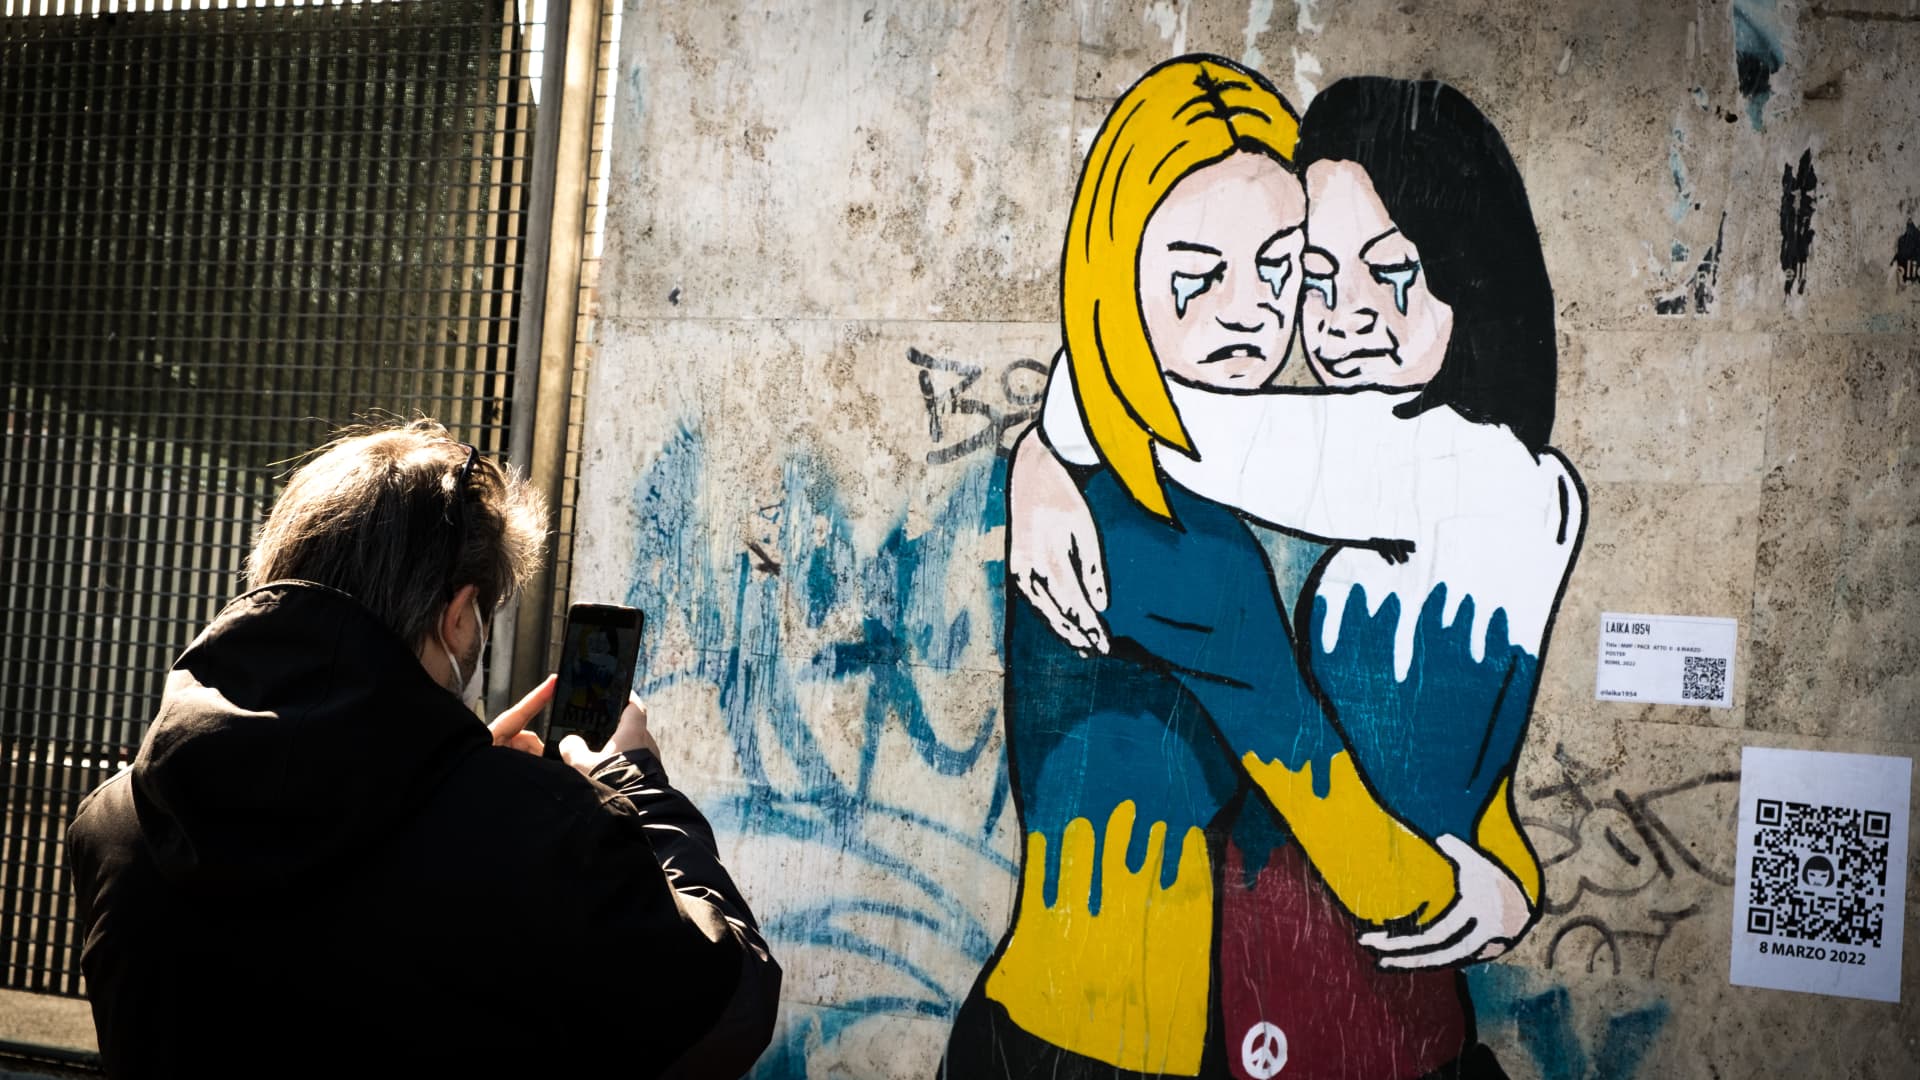 Anti-Ukraine war mural by Italian street artist known by the name of 'Laika' depicting a hug between two women, one dressed in the Russian, the other in the Ukrainian national colors, respectively, above the word MIR (Peace) In the Ostiense district on March 09, 2022 in Rome, Italy.